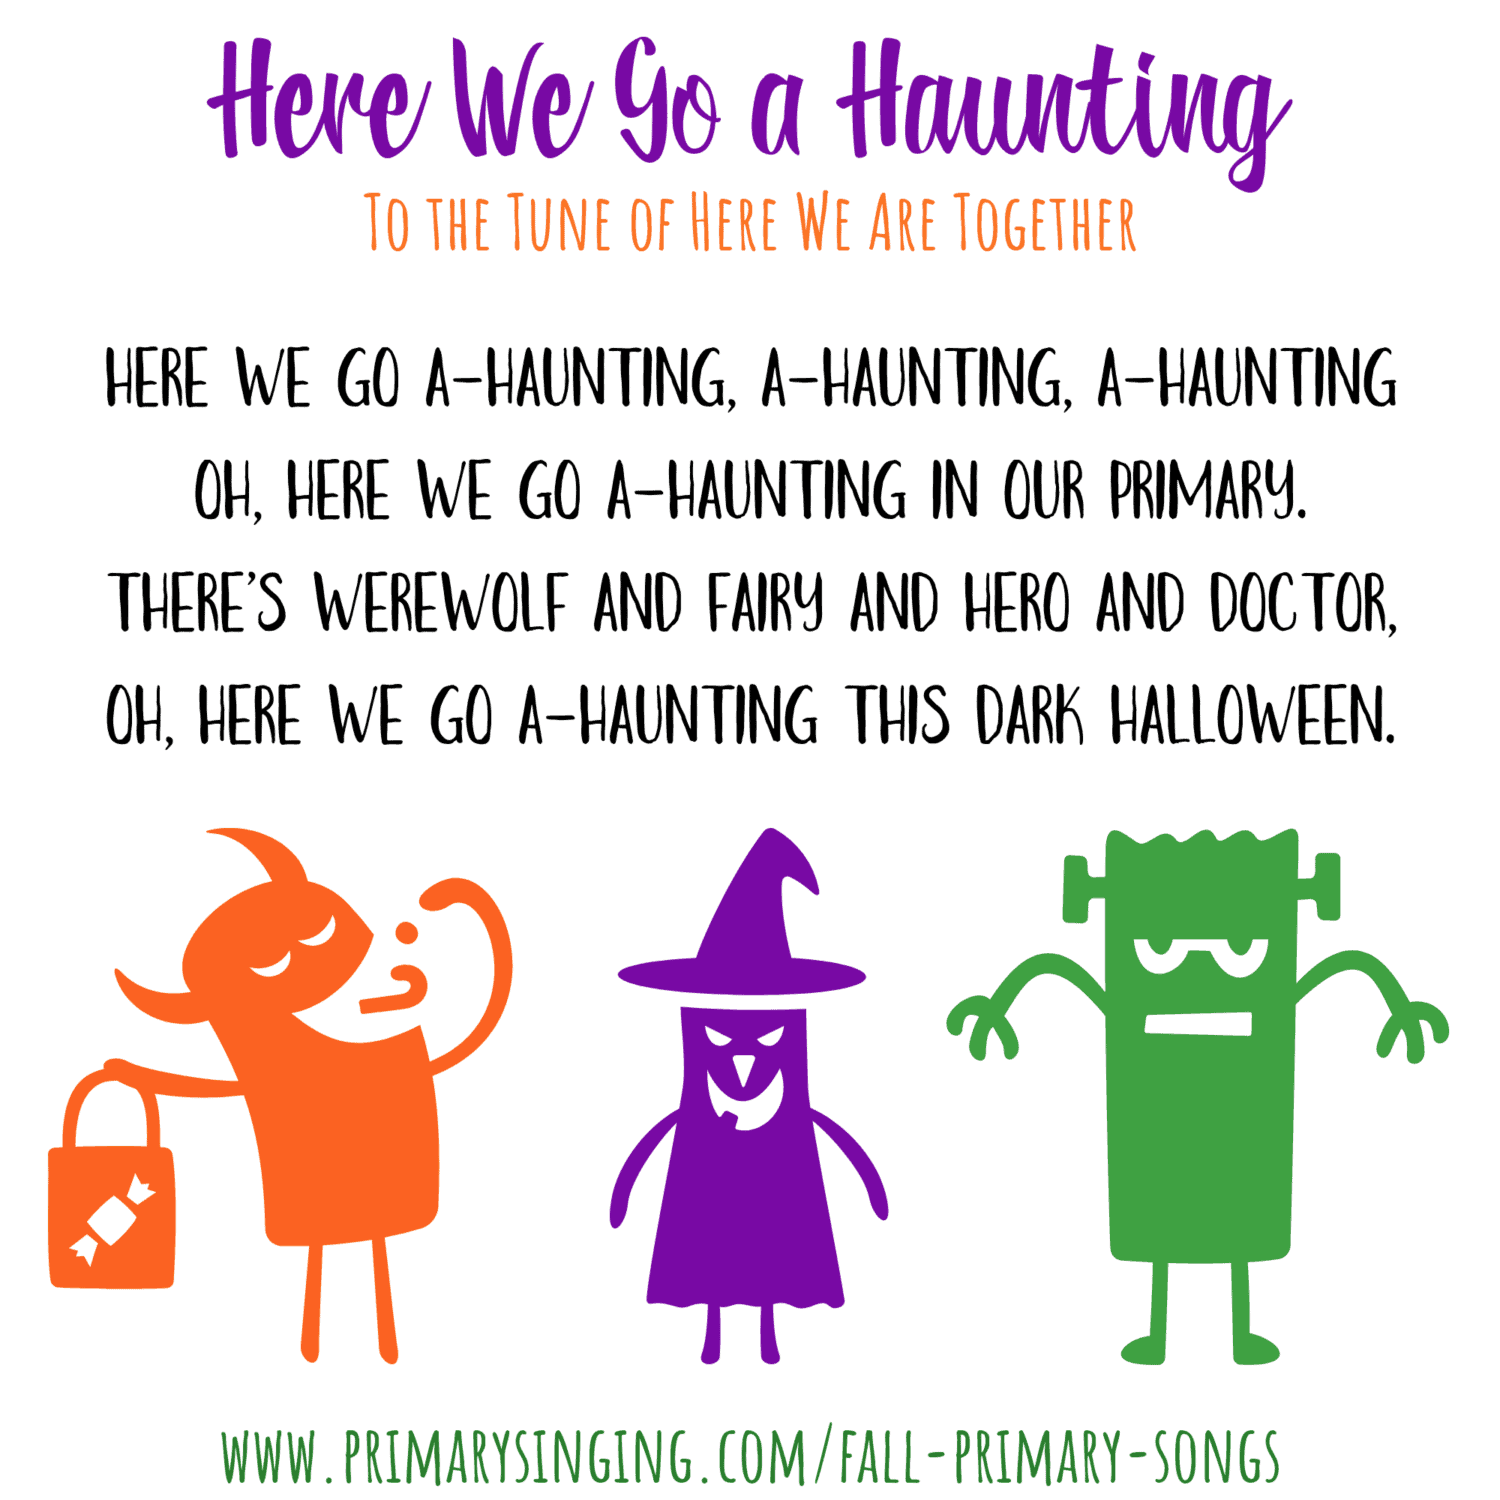 Here We Go a-Haunting sung to the tune of the LDS Primary Song Here We Are Together. Try this fun lyrics swap to bring a little Halloween fun into your Singing Time with themed lyrics for LDS Primary Music Leaders